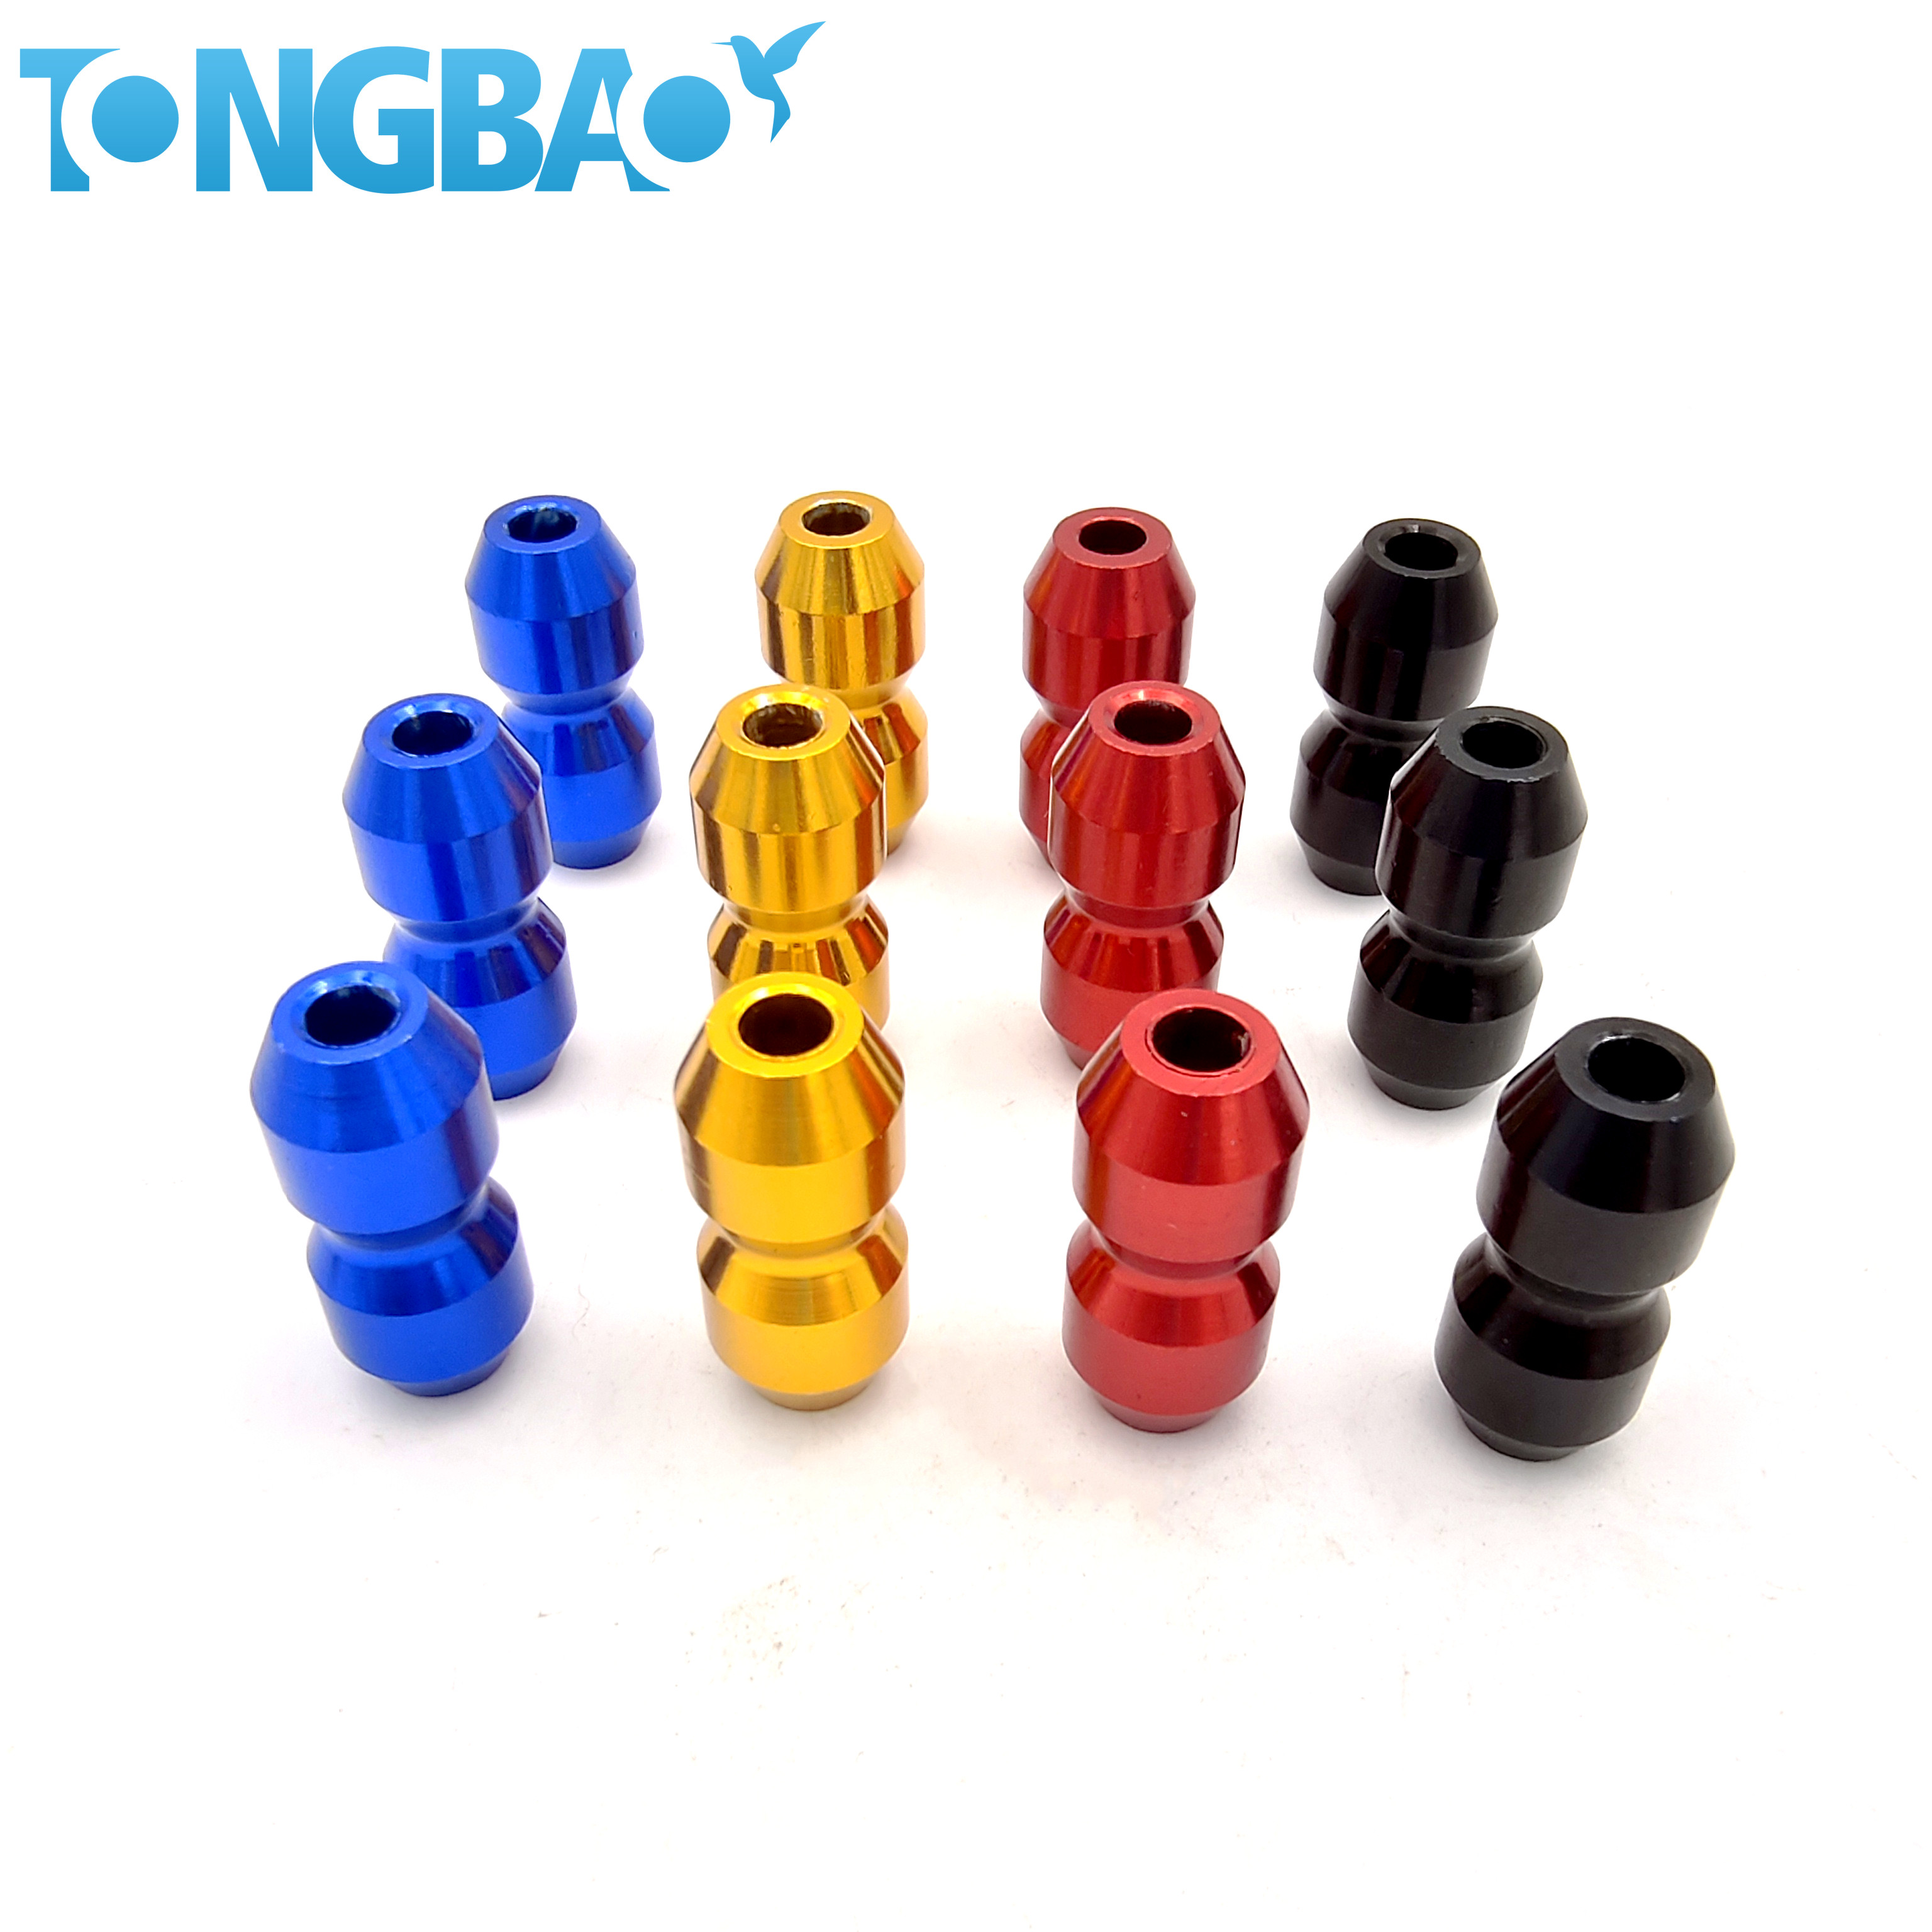 Aluminum Customizable Cable Clamp for Kart Black/ Gold/Red /Blue/Silver /Titanium